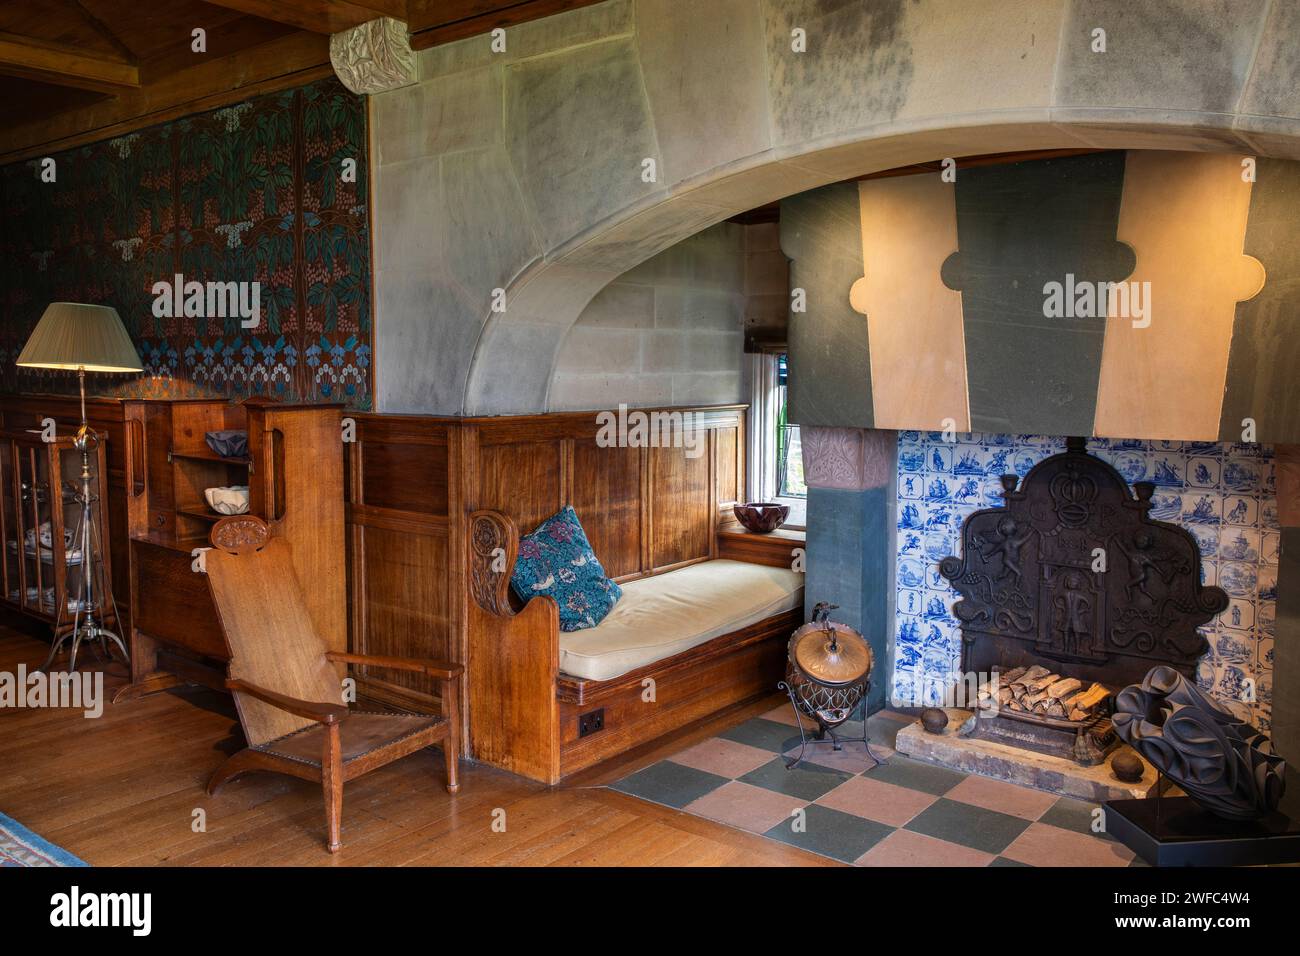 UK, Cumbria, Bowness on Windermere, Blackwell, Arts and Crafts House, Dining Room, fireplace Stock Photo